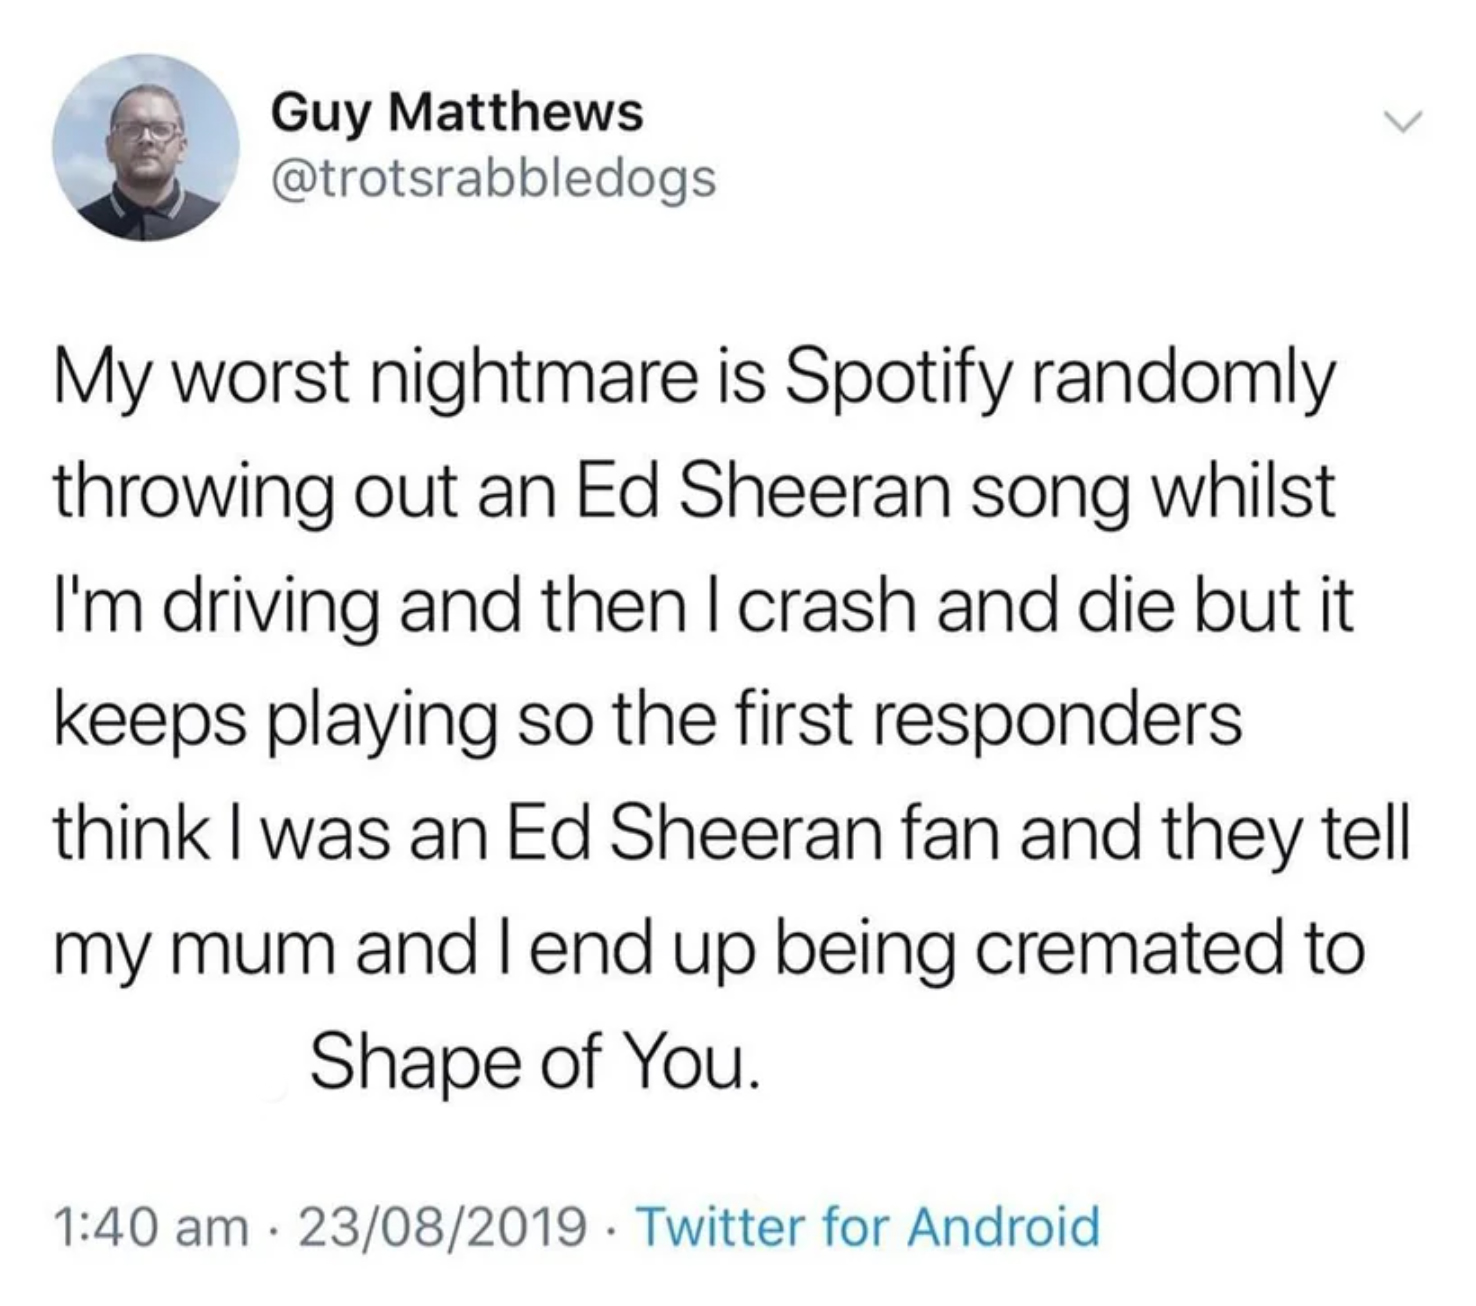 screenshot - Guy Matthews My worst nightmare is Spotify randomly throwing out an Ed Sheeran song whilst I'm driving and then I crash and die but it keeps playing so the first responders think I was an Ed Sheeran fan and they tell my mum and I end up being